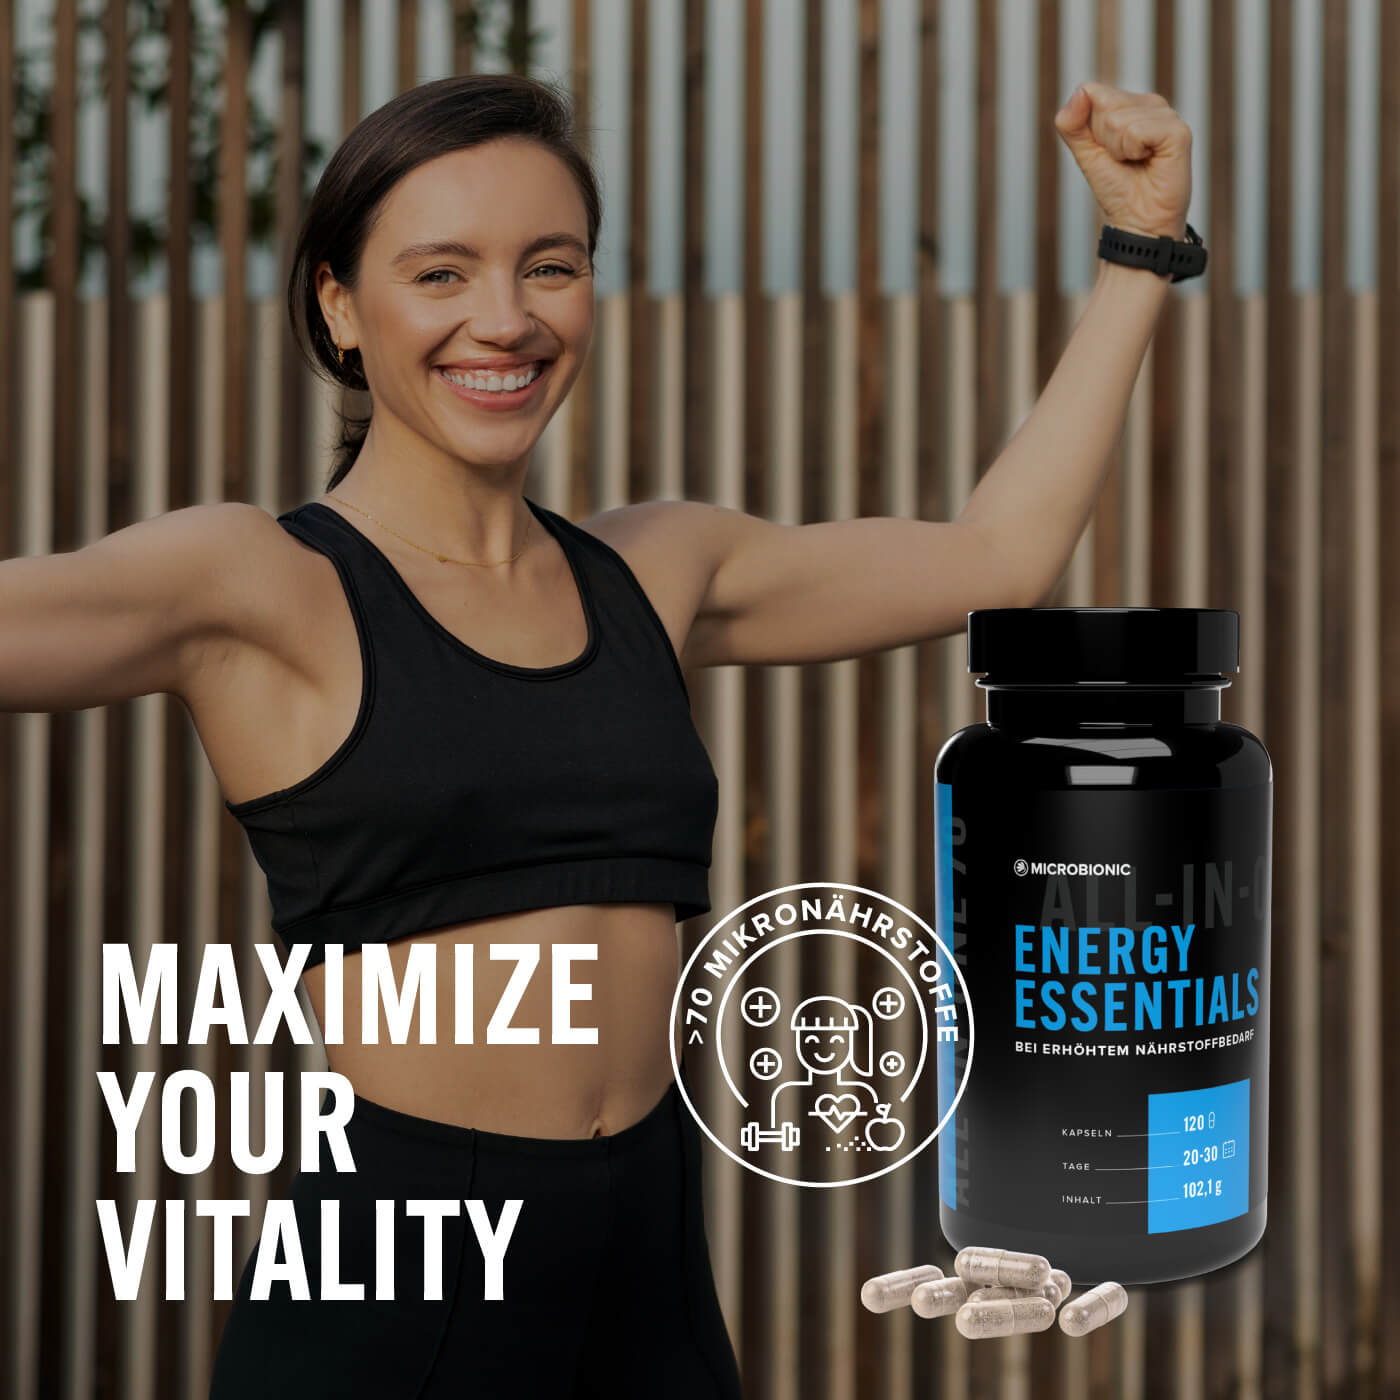 Energy Essentials – Maximize Your Vitality